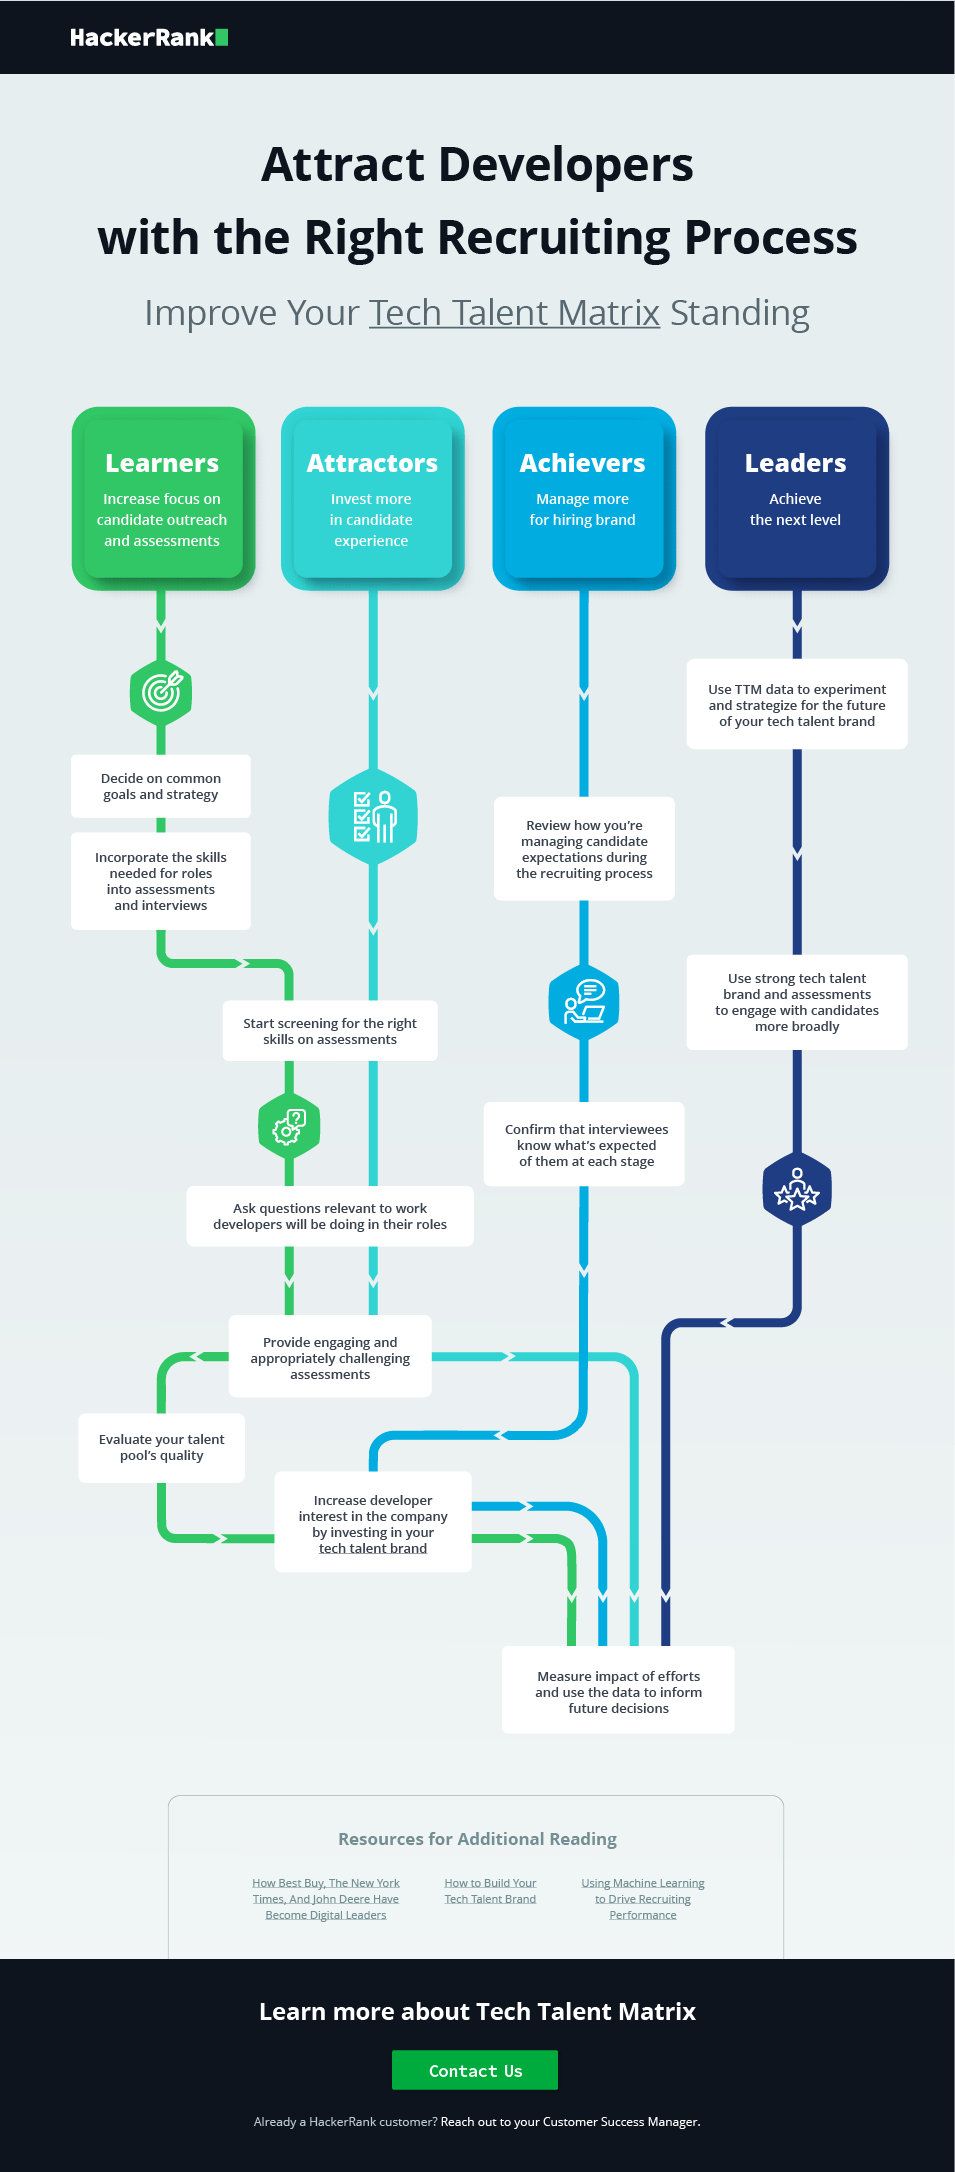 Infographic on "Attract Developers with the Right Recruiting Process"